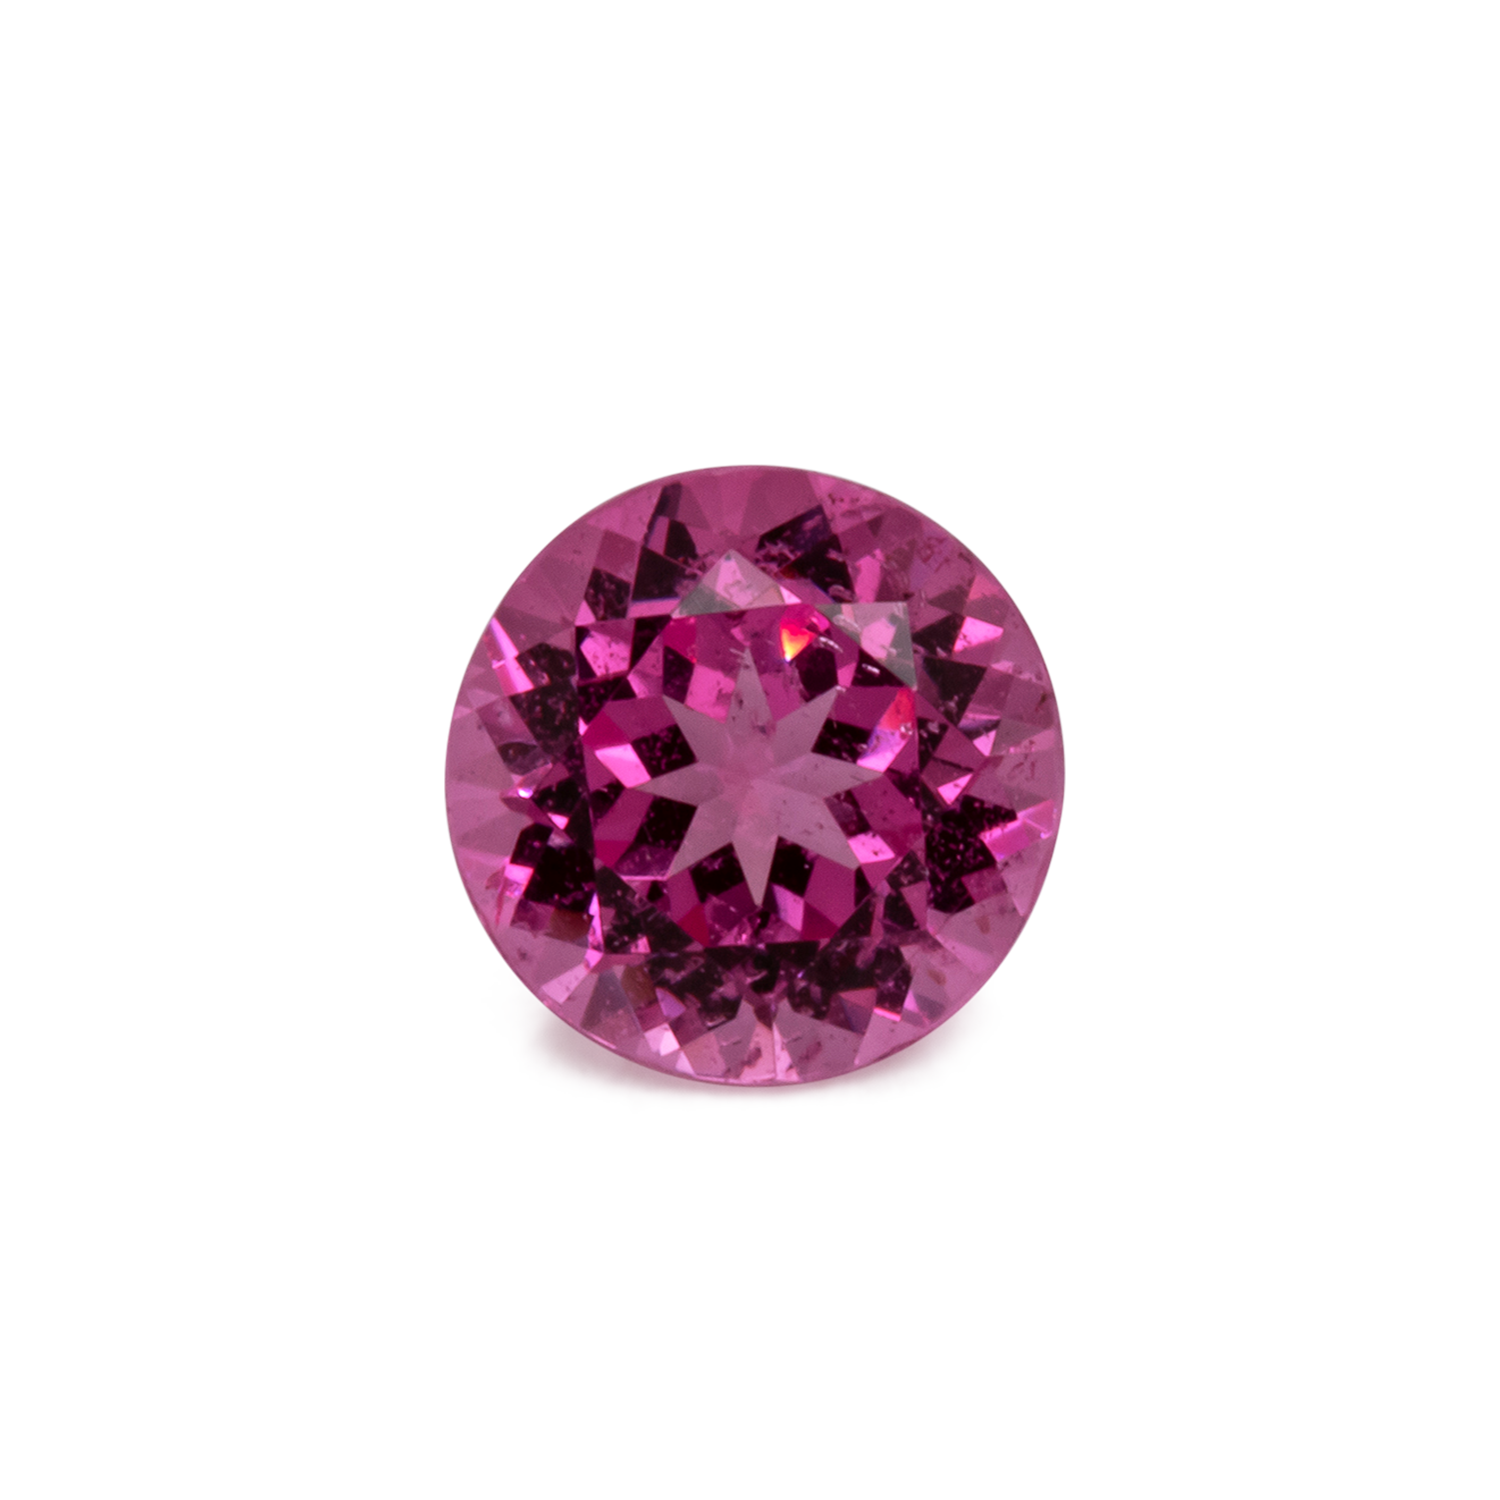 Spinell - rosa, rund, 4,7x4,7 mm, 0,49 cts, Nr. SP90023